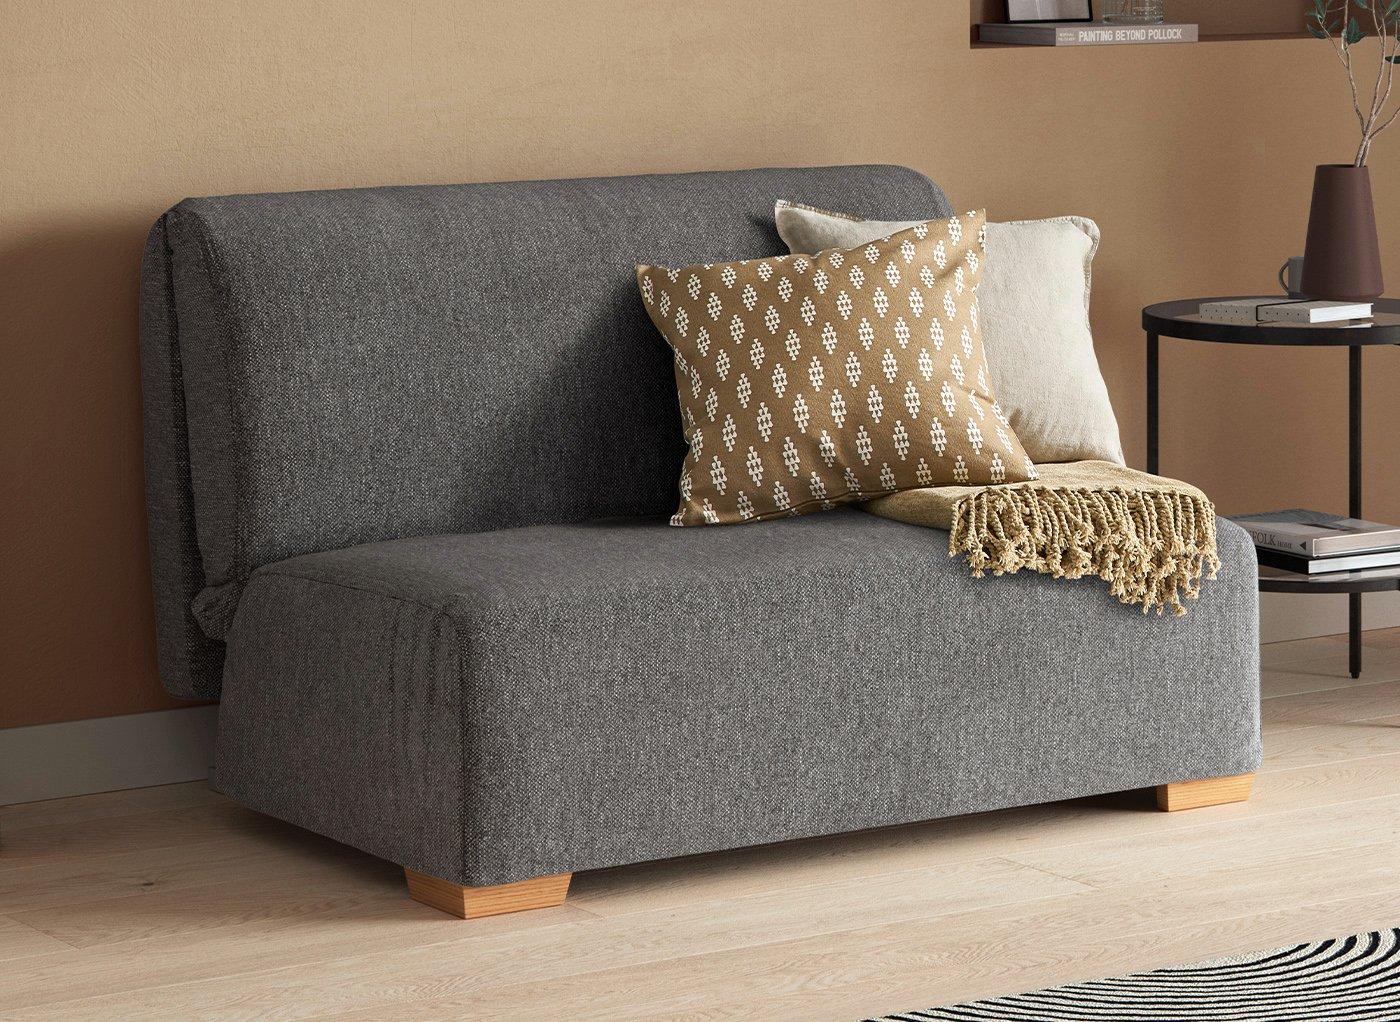 Top 60+ Awe-inspiring b&q sofa beds With Many New Styles